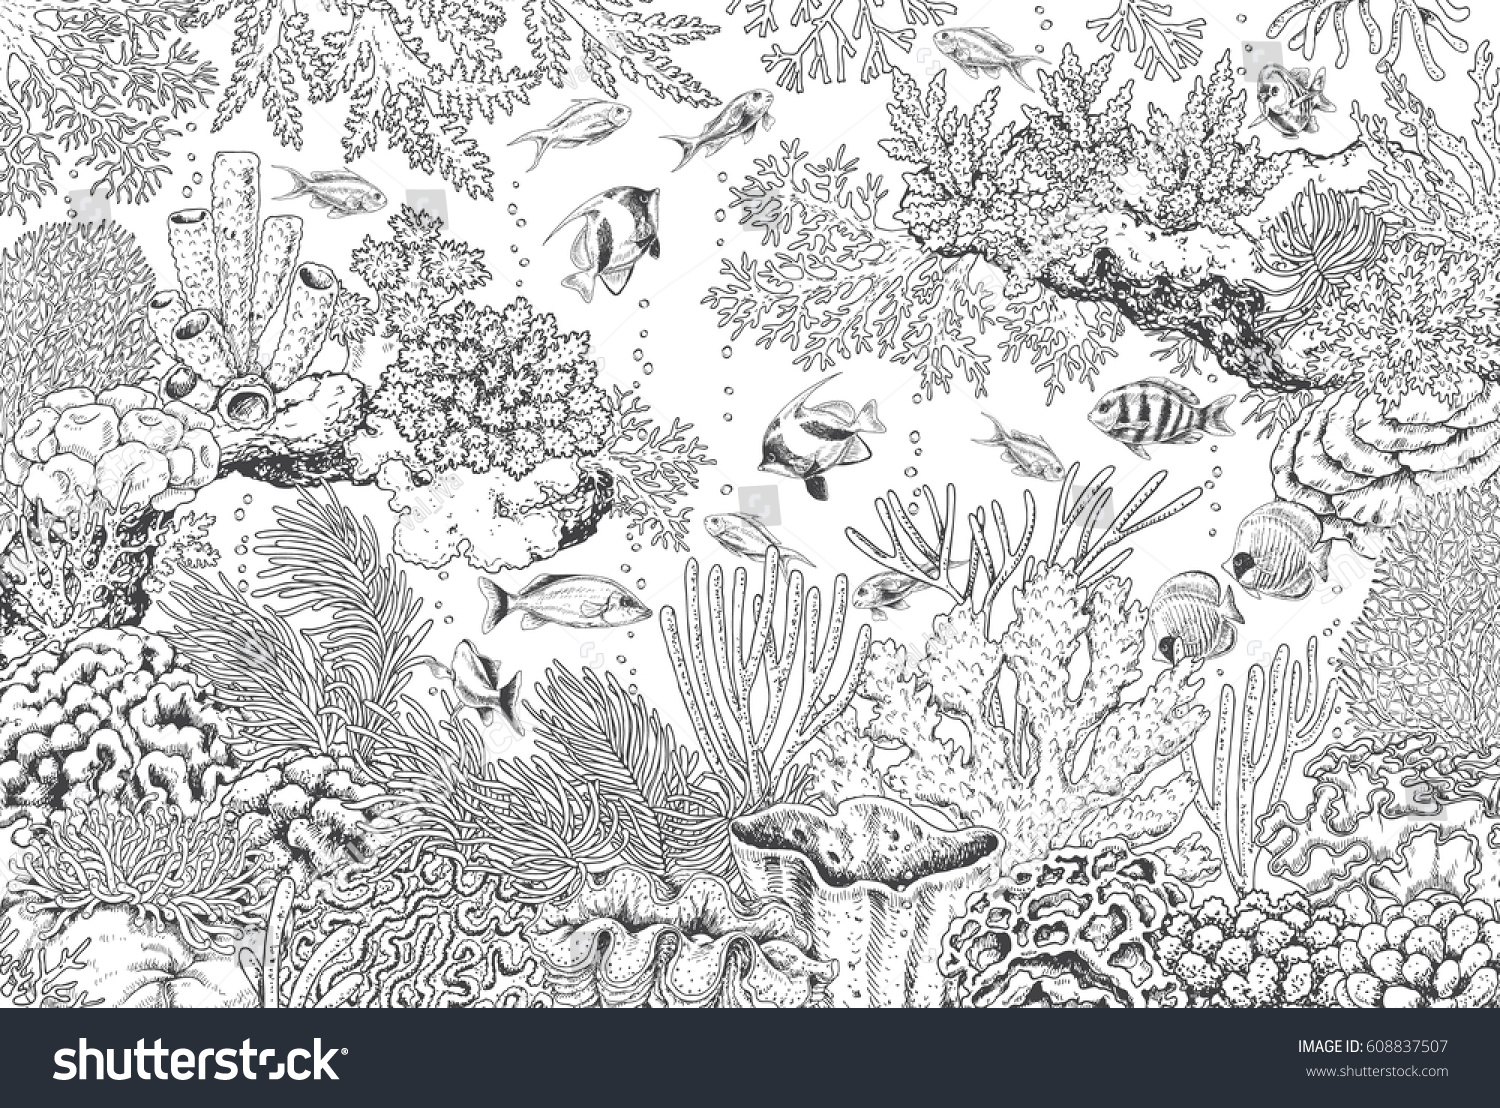 Hand Drawn Underwater Natural Elements Sketch Stock Vector (Royalty ...